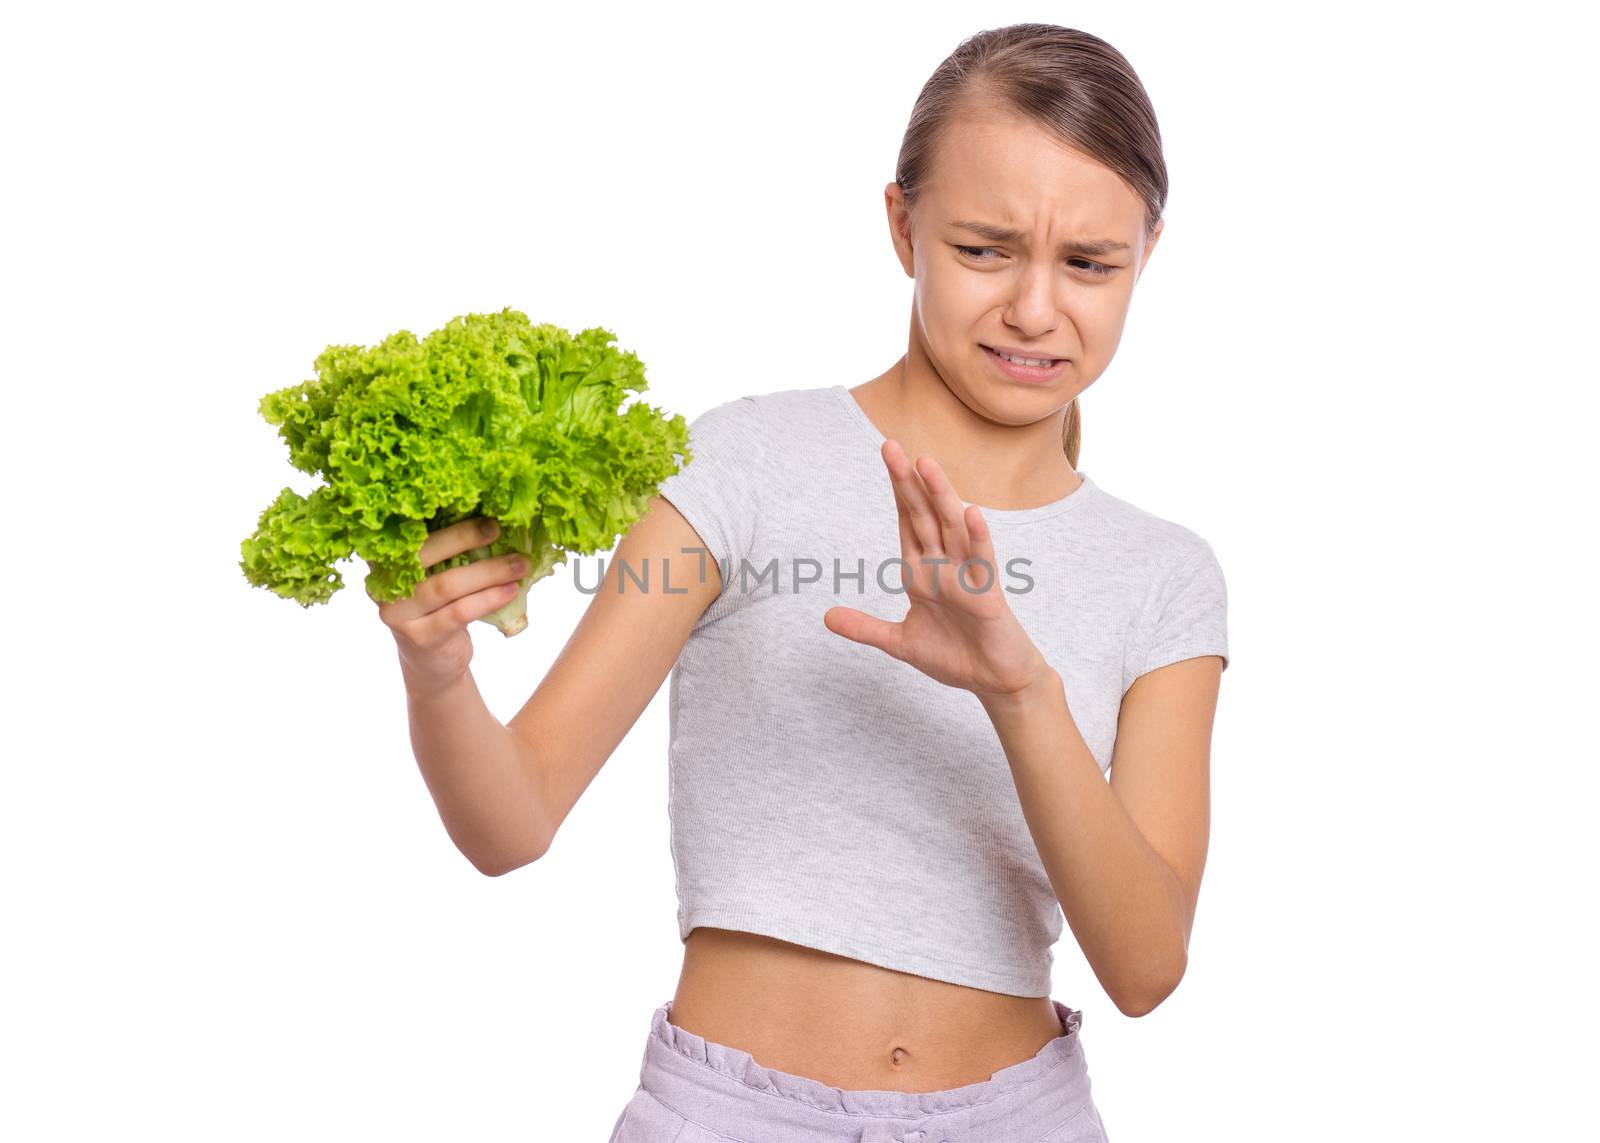 Beautiful young teen girl holding holding green salad, isolated on white background